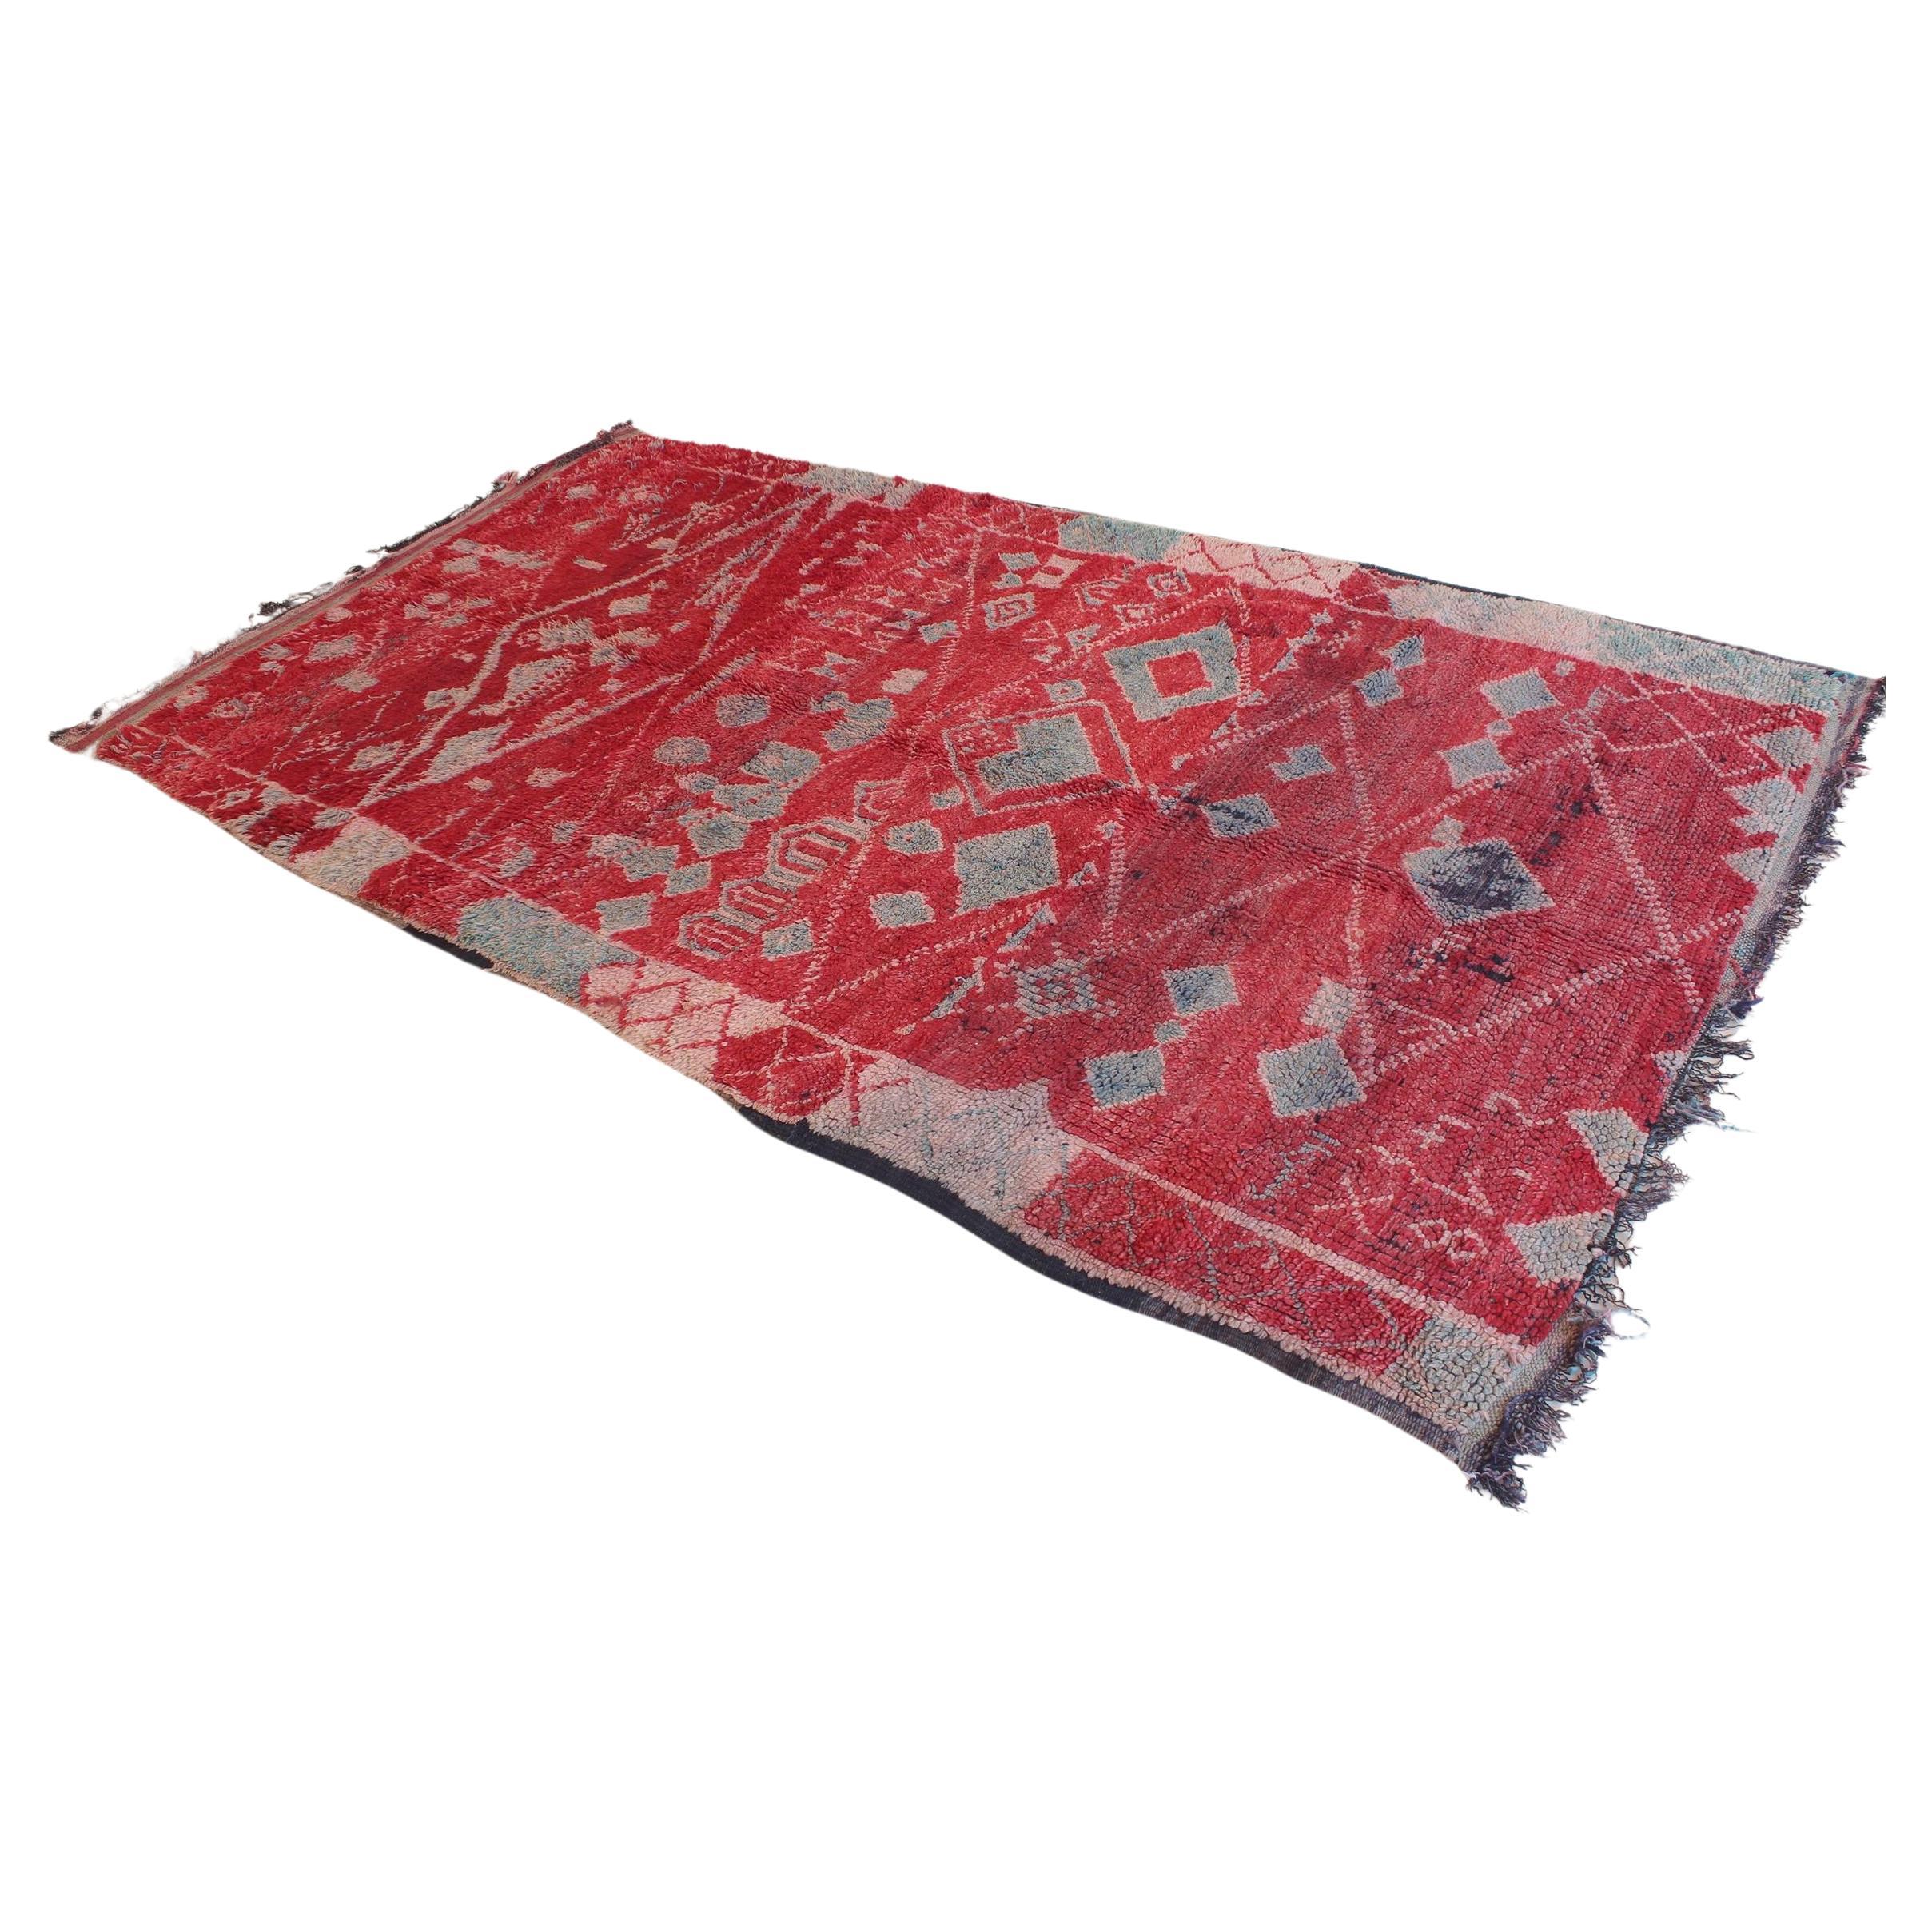 Vintage Moroccan Zayane rug - Red/green - 7x12feet / 213x365cm For Sale